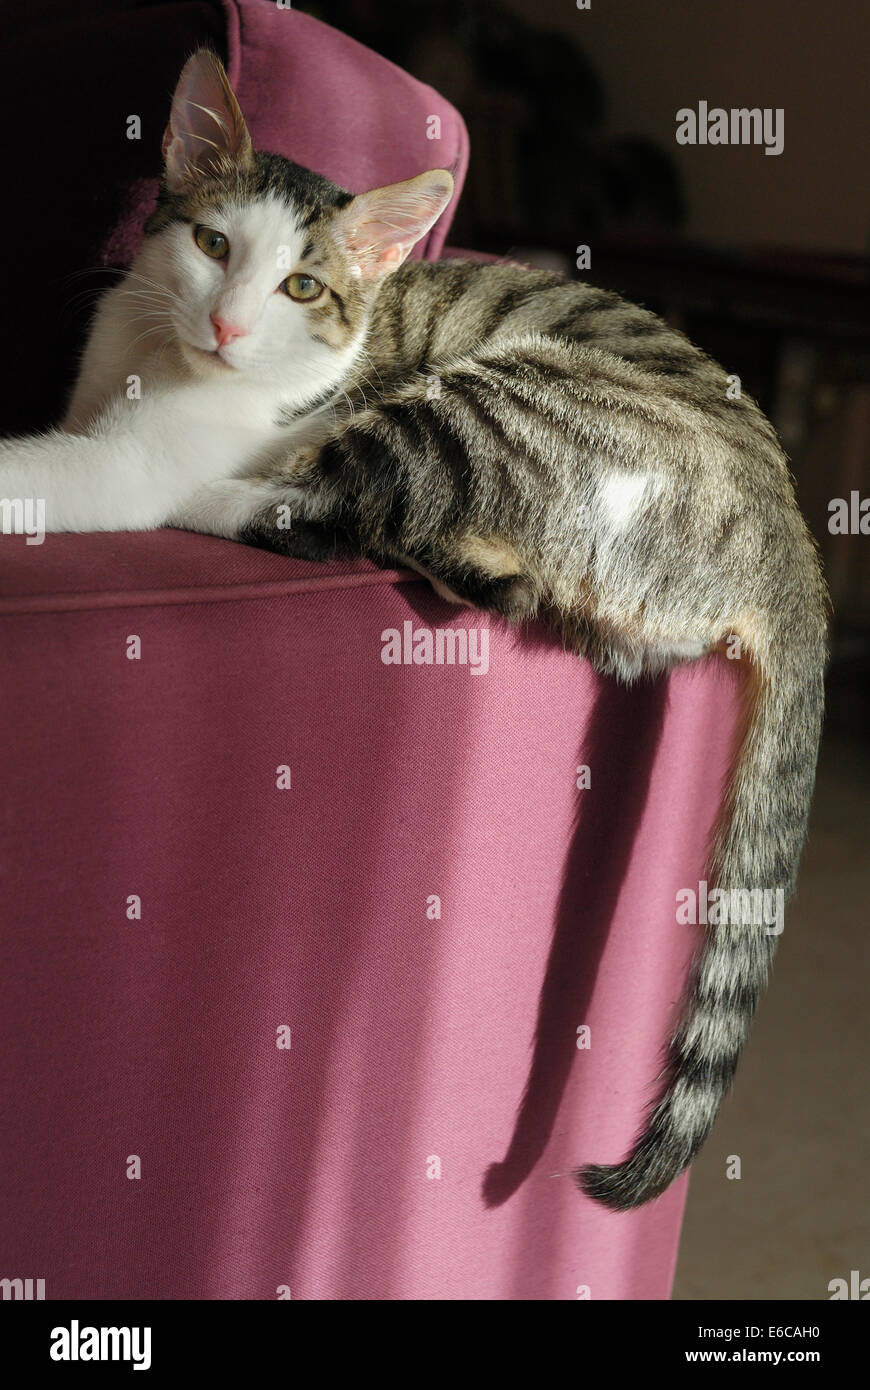 Cat relaxing on the arm of a sofa indoors Stock Photo